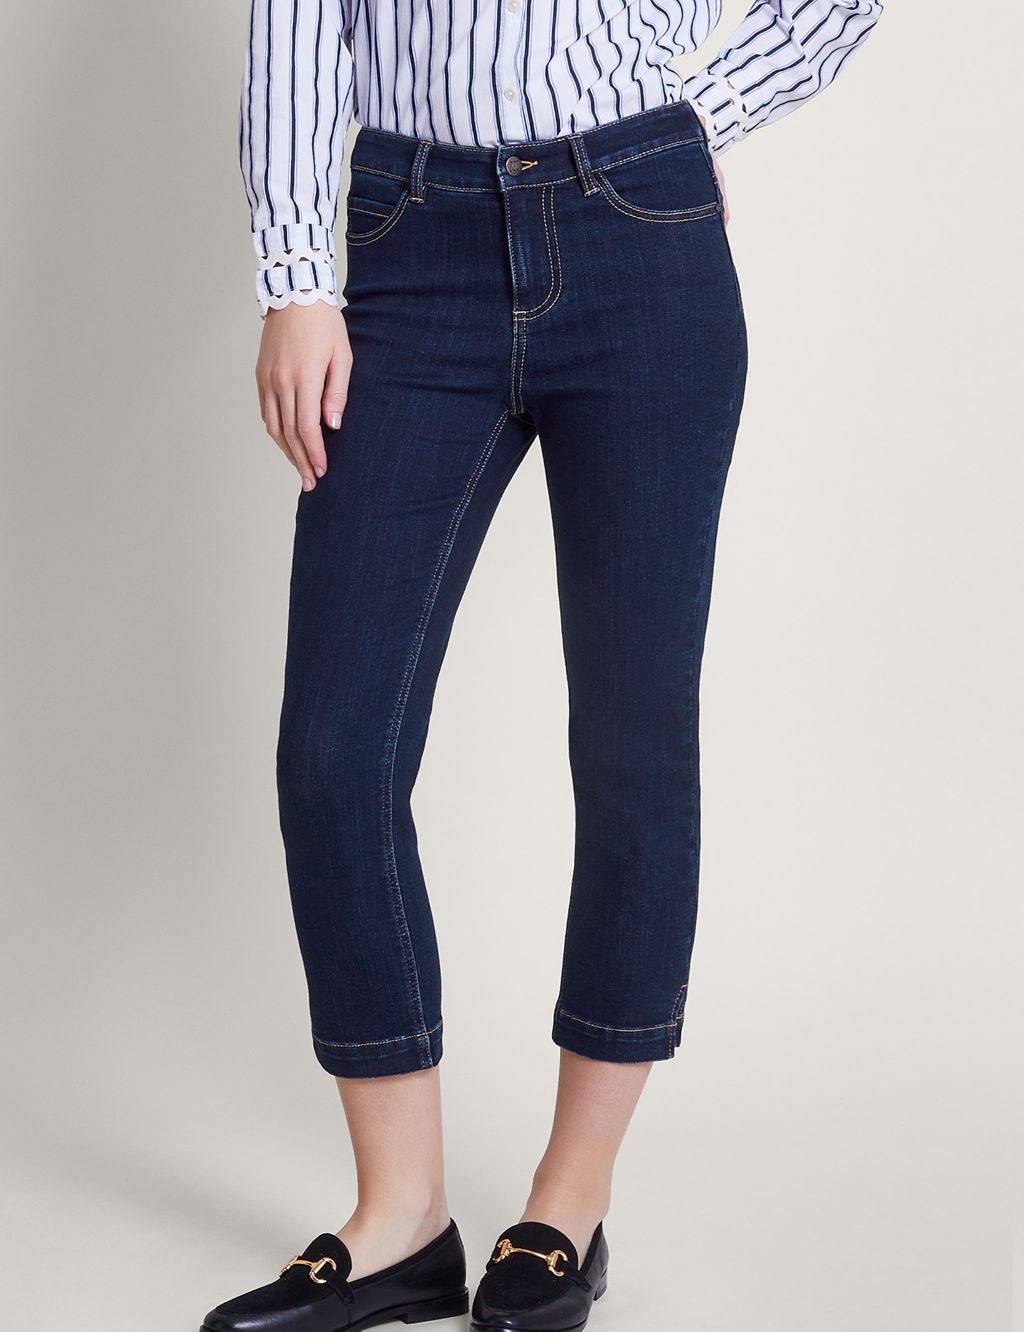 Flared baggy jeans - Women